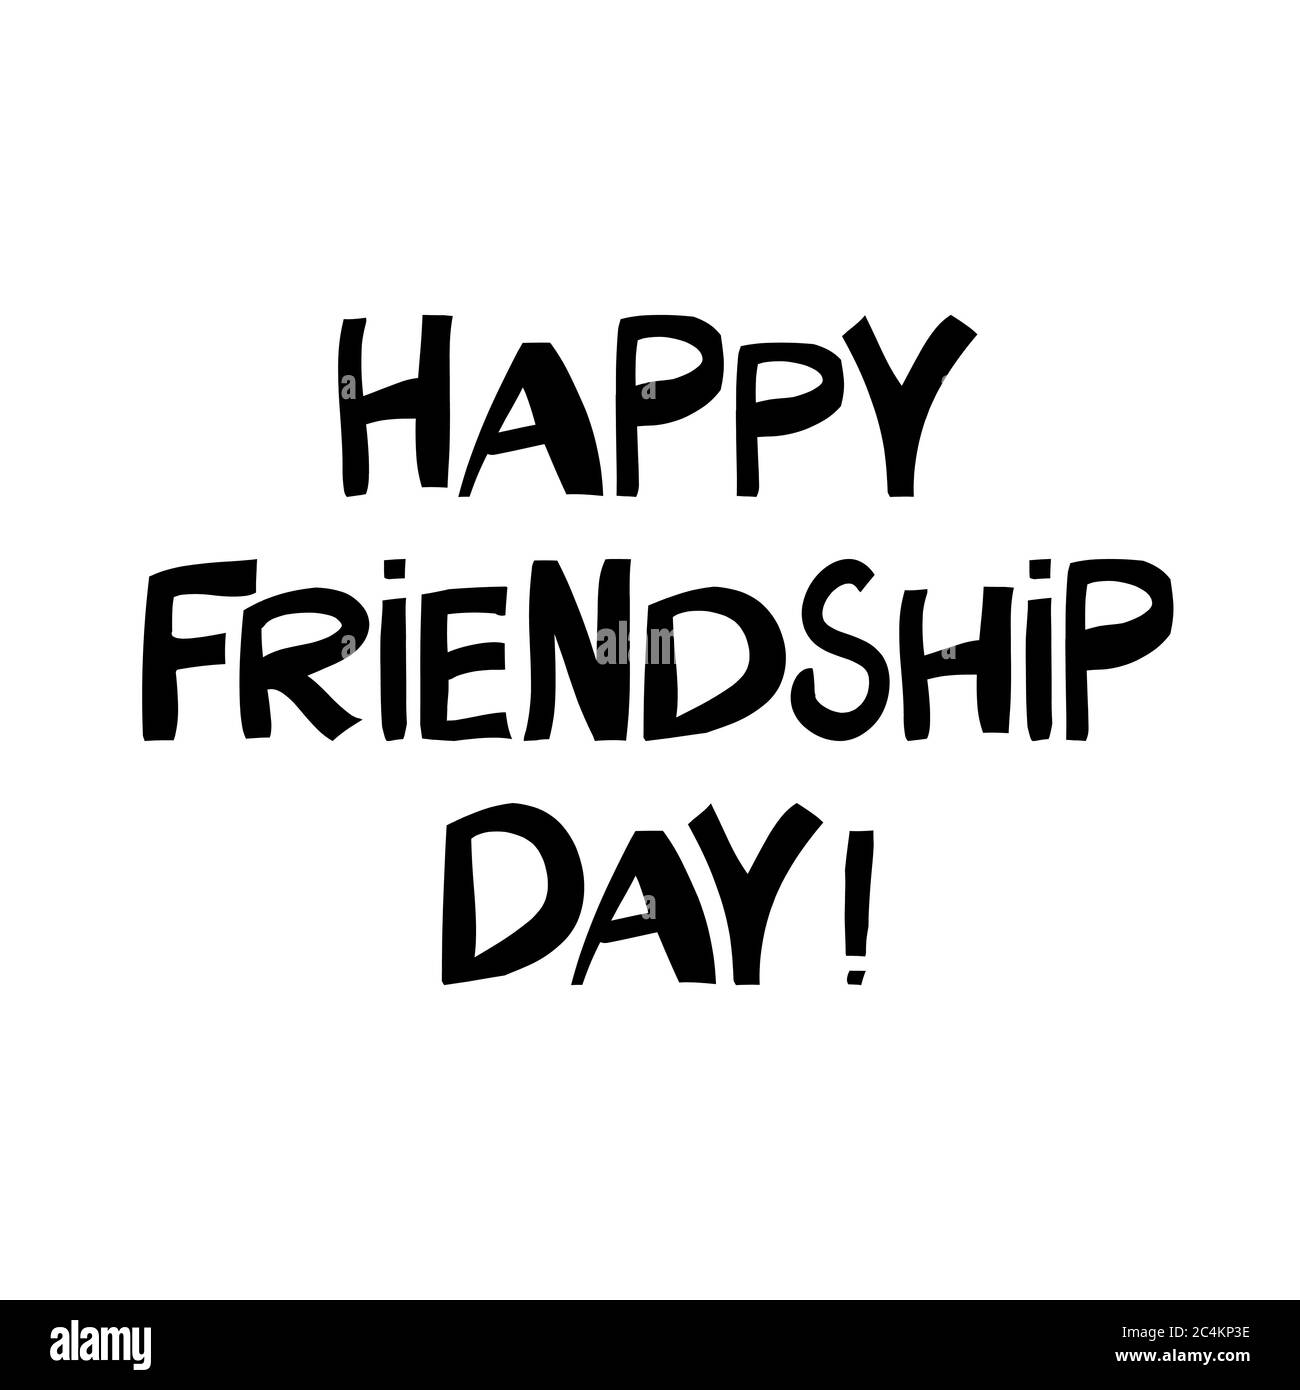 Happy friendship day. Cute hand drawn lettering in modern ...